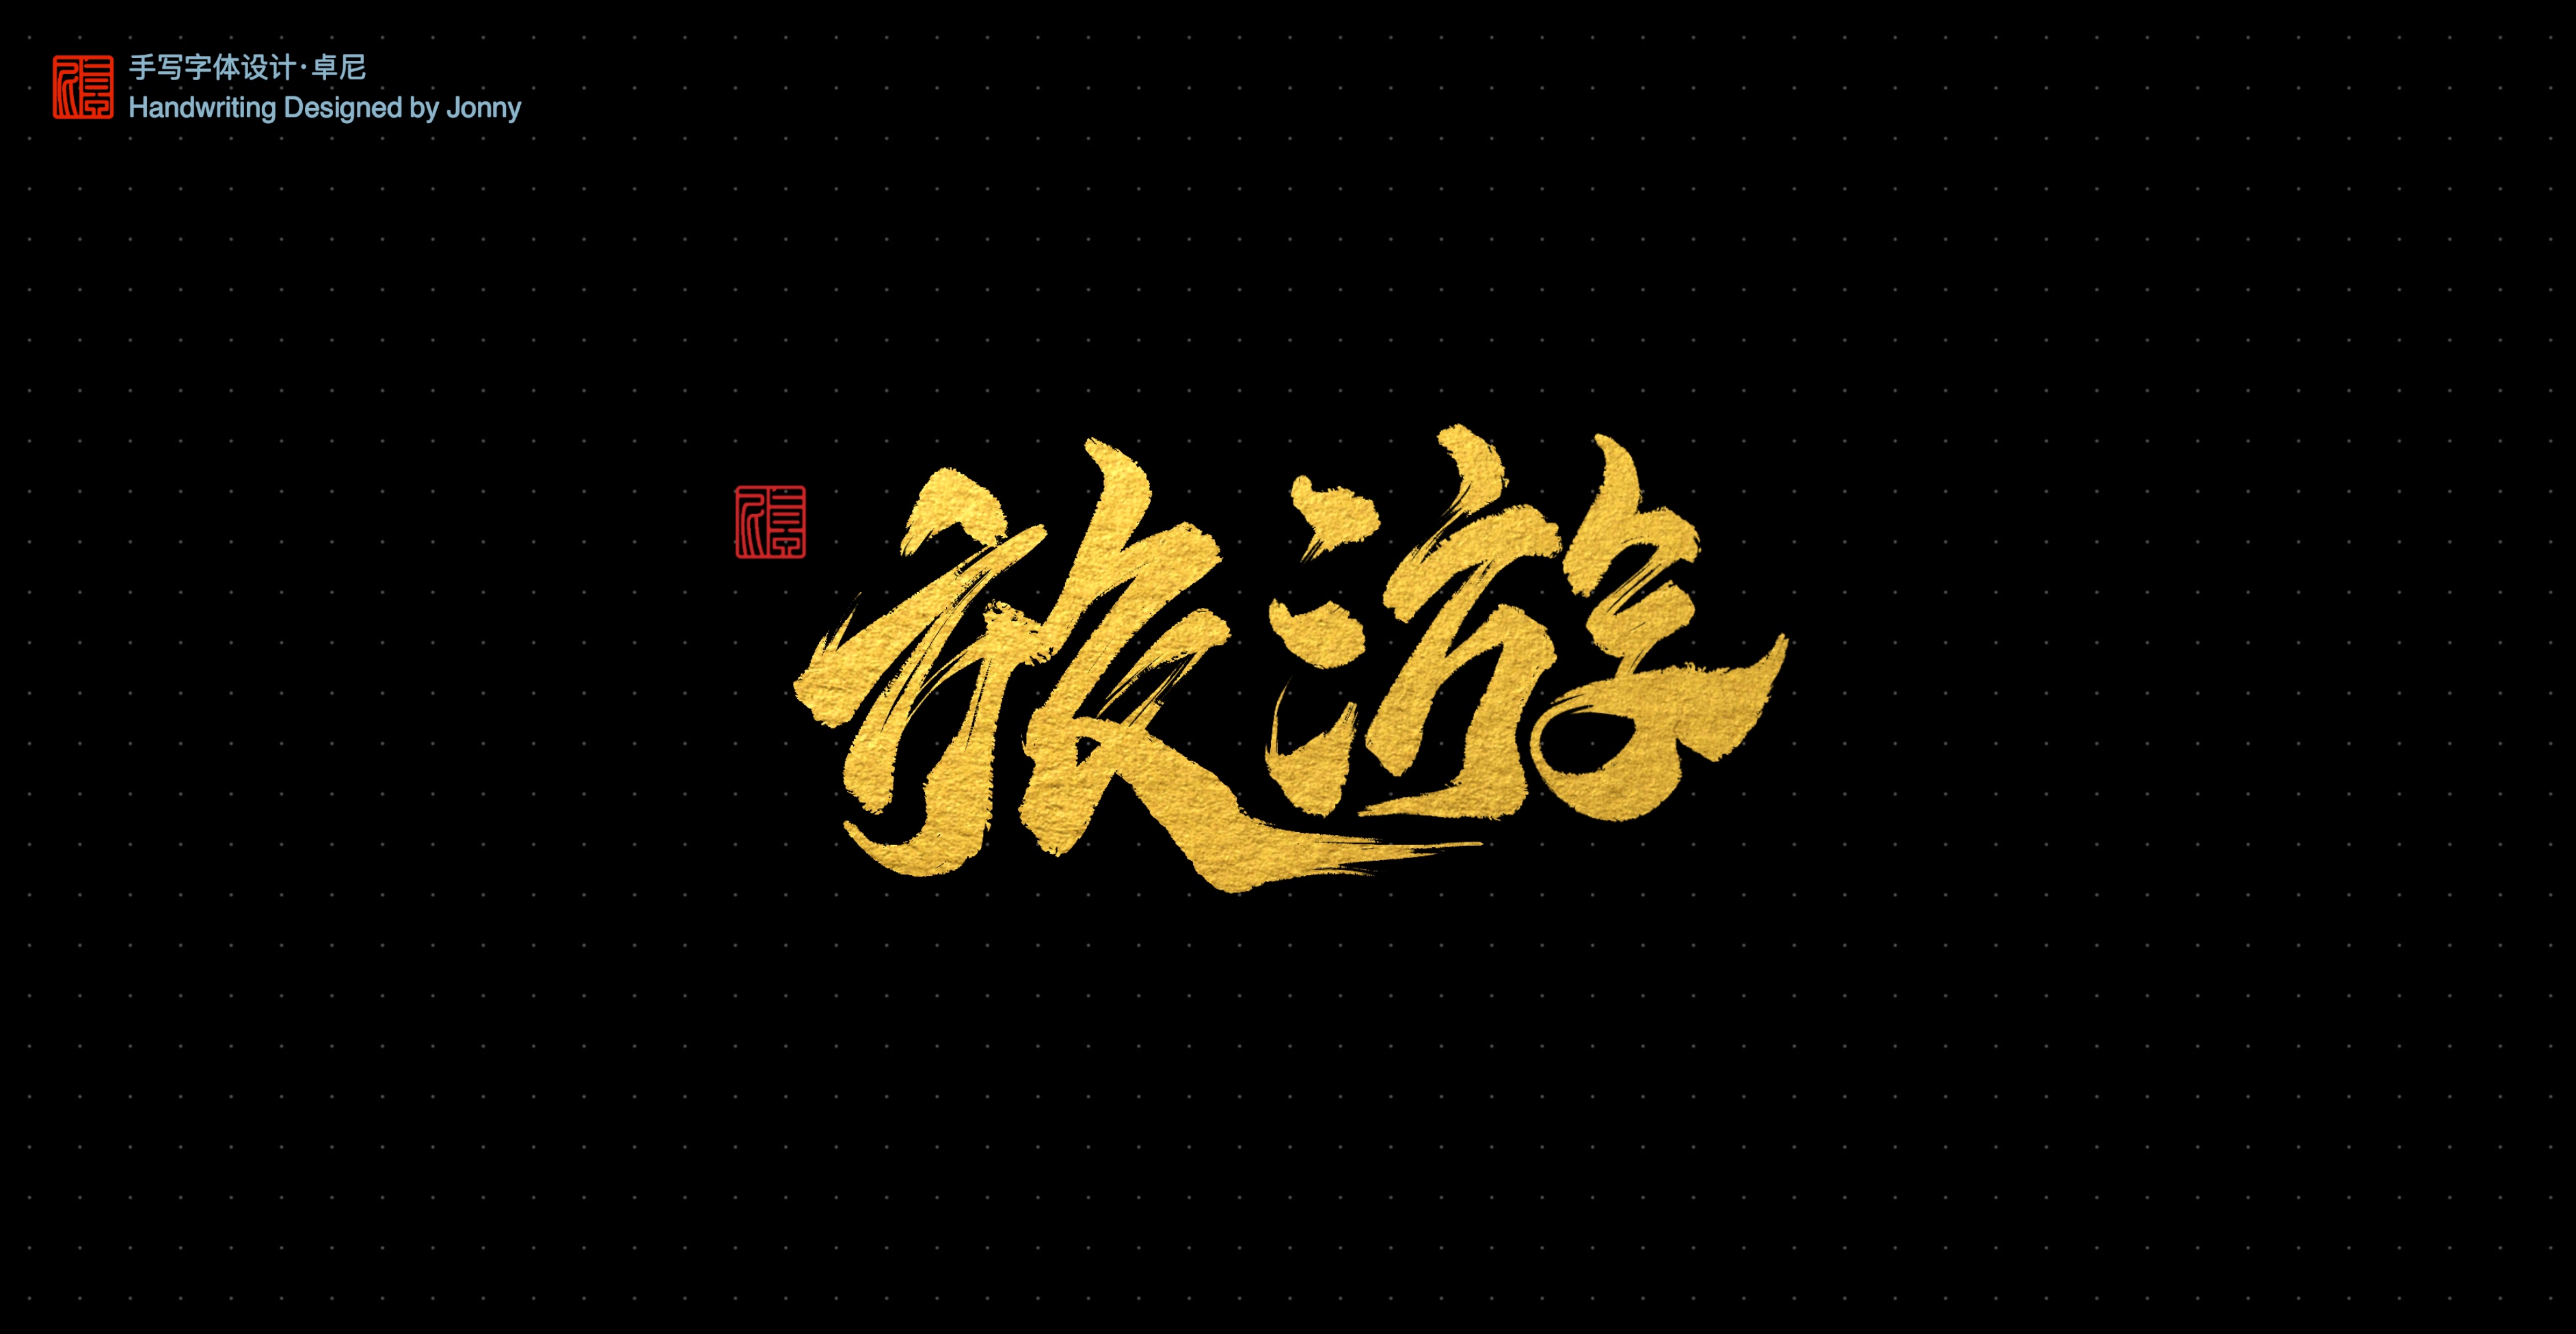 13P Collection of the latest Chinese font design schemes in 2021 #.131